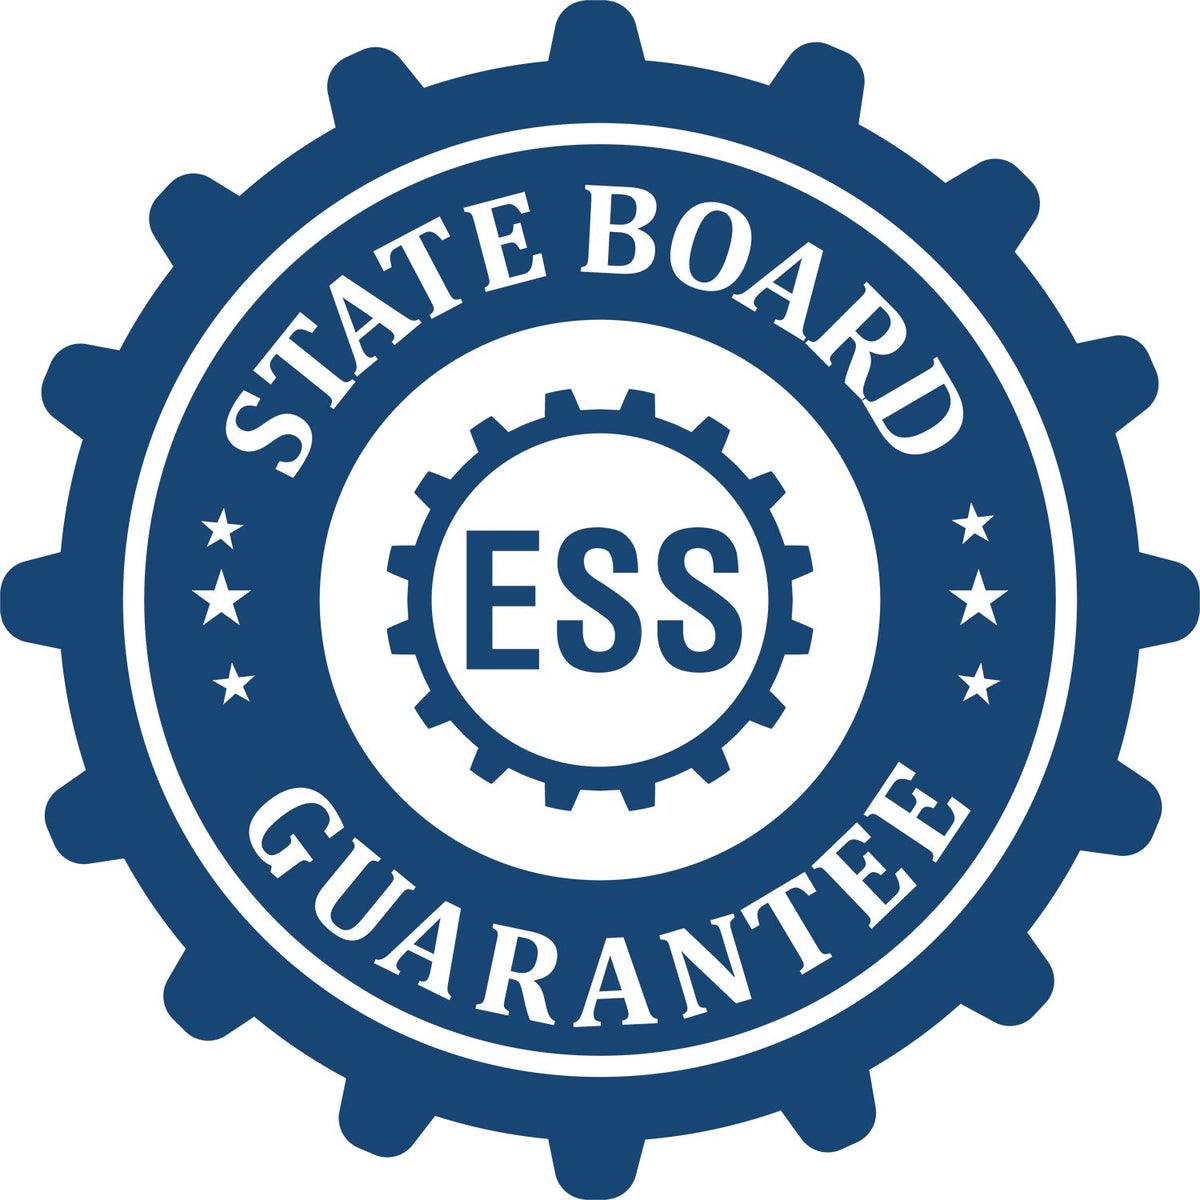 An emblem in a gear shape illustrating a state board guarantee for the Heavy Duty Cast Iron Minnesota Architect Embosser product.